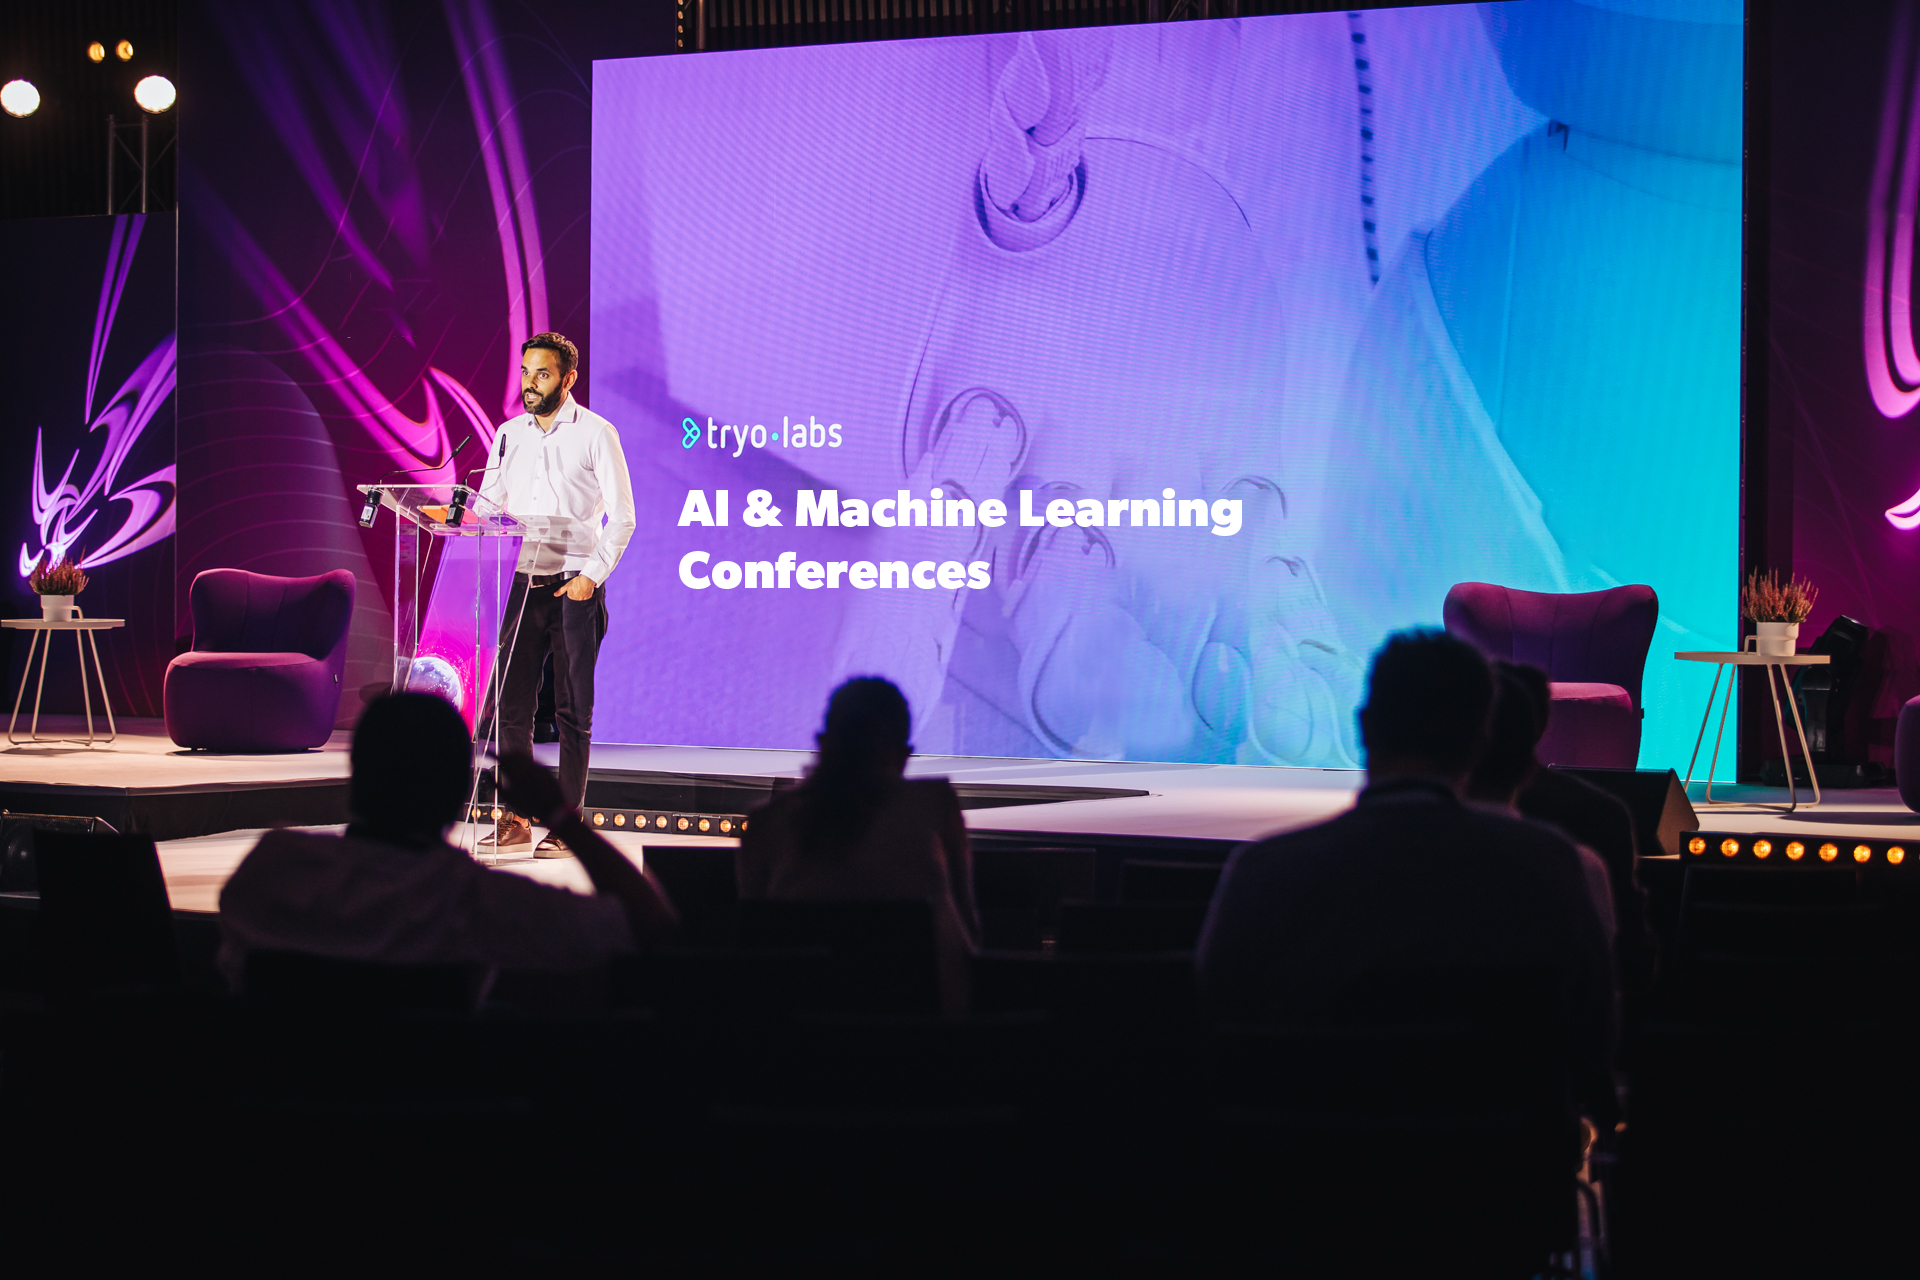 List of AI and Machine Learning conferences in 2022